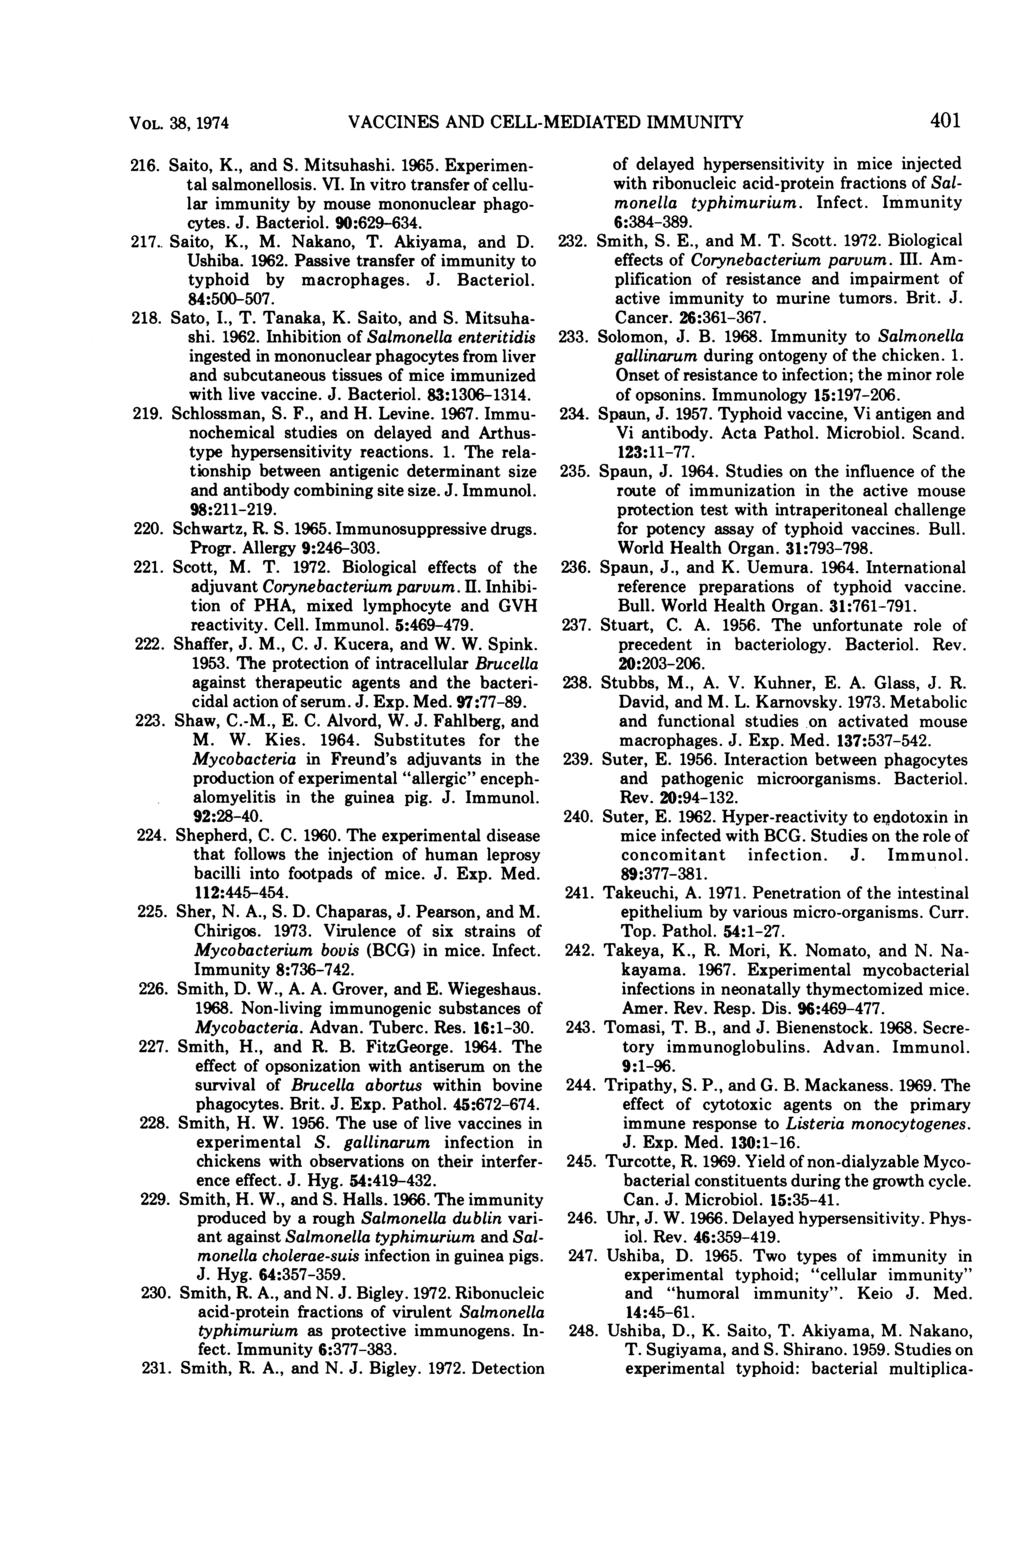 VOL. 38, 1974 VACCINES AND CELL-MEDIATED IMMUNITY 216. Saito, K., and S. Mitsuhashi. 1965. Experimental salmonellosis. VI. In vitro transfer of cellular immunity by mouse mononuclear phagocytes. J.